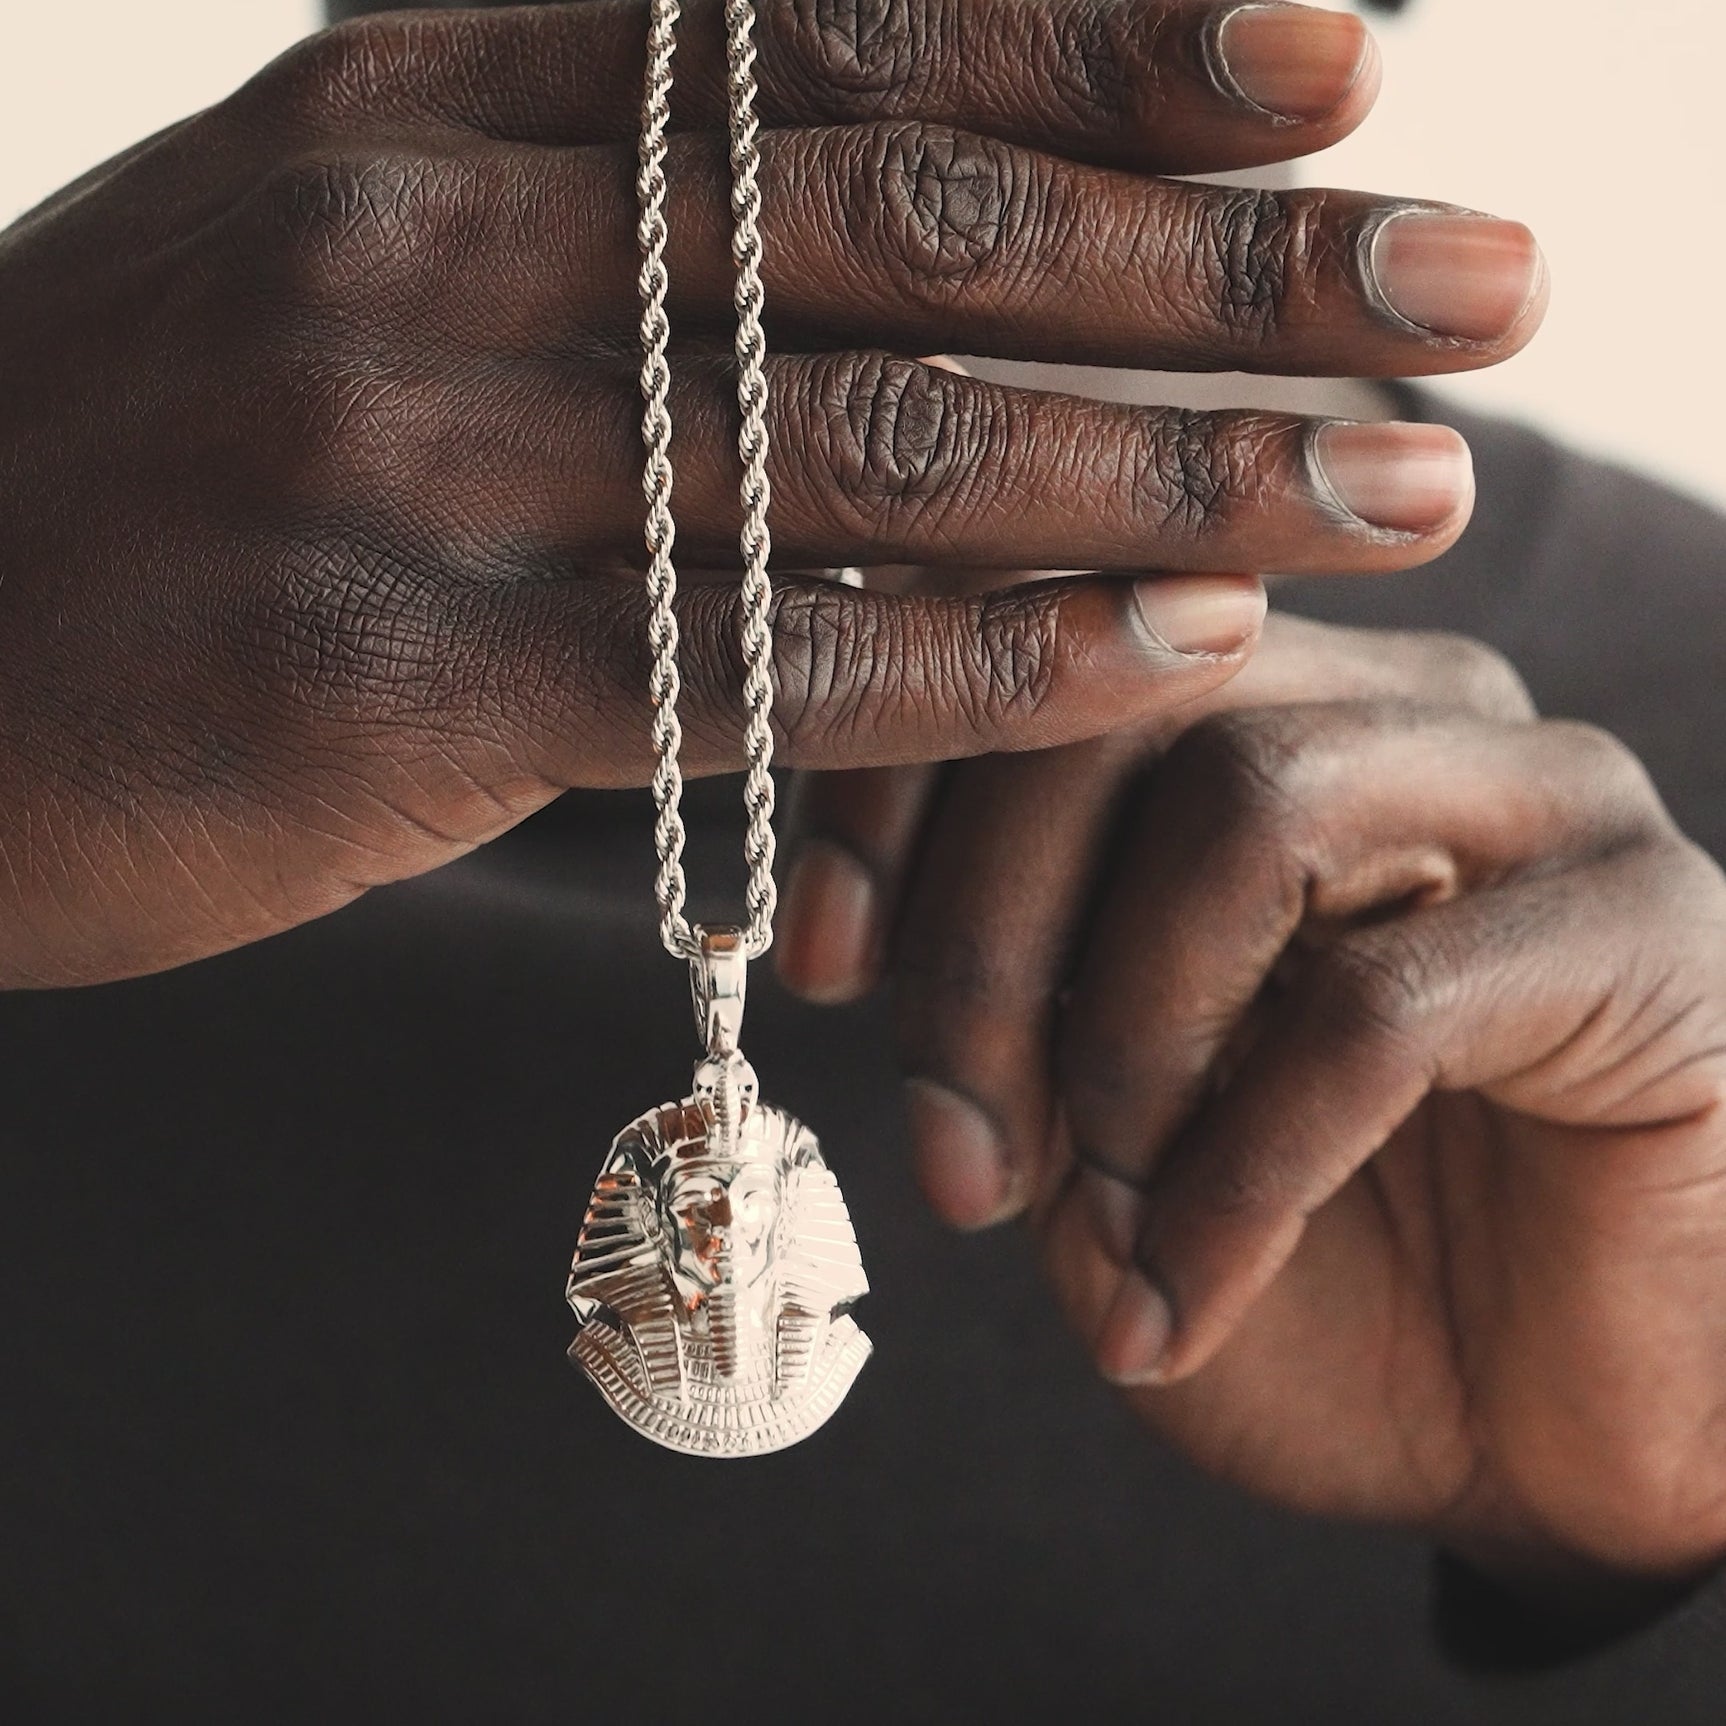 Pharaoh Head V2 Necklace Pendant & Rope Chain White Gold The Gold Gods Video